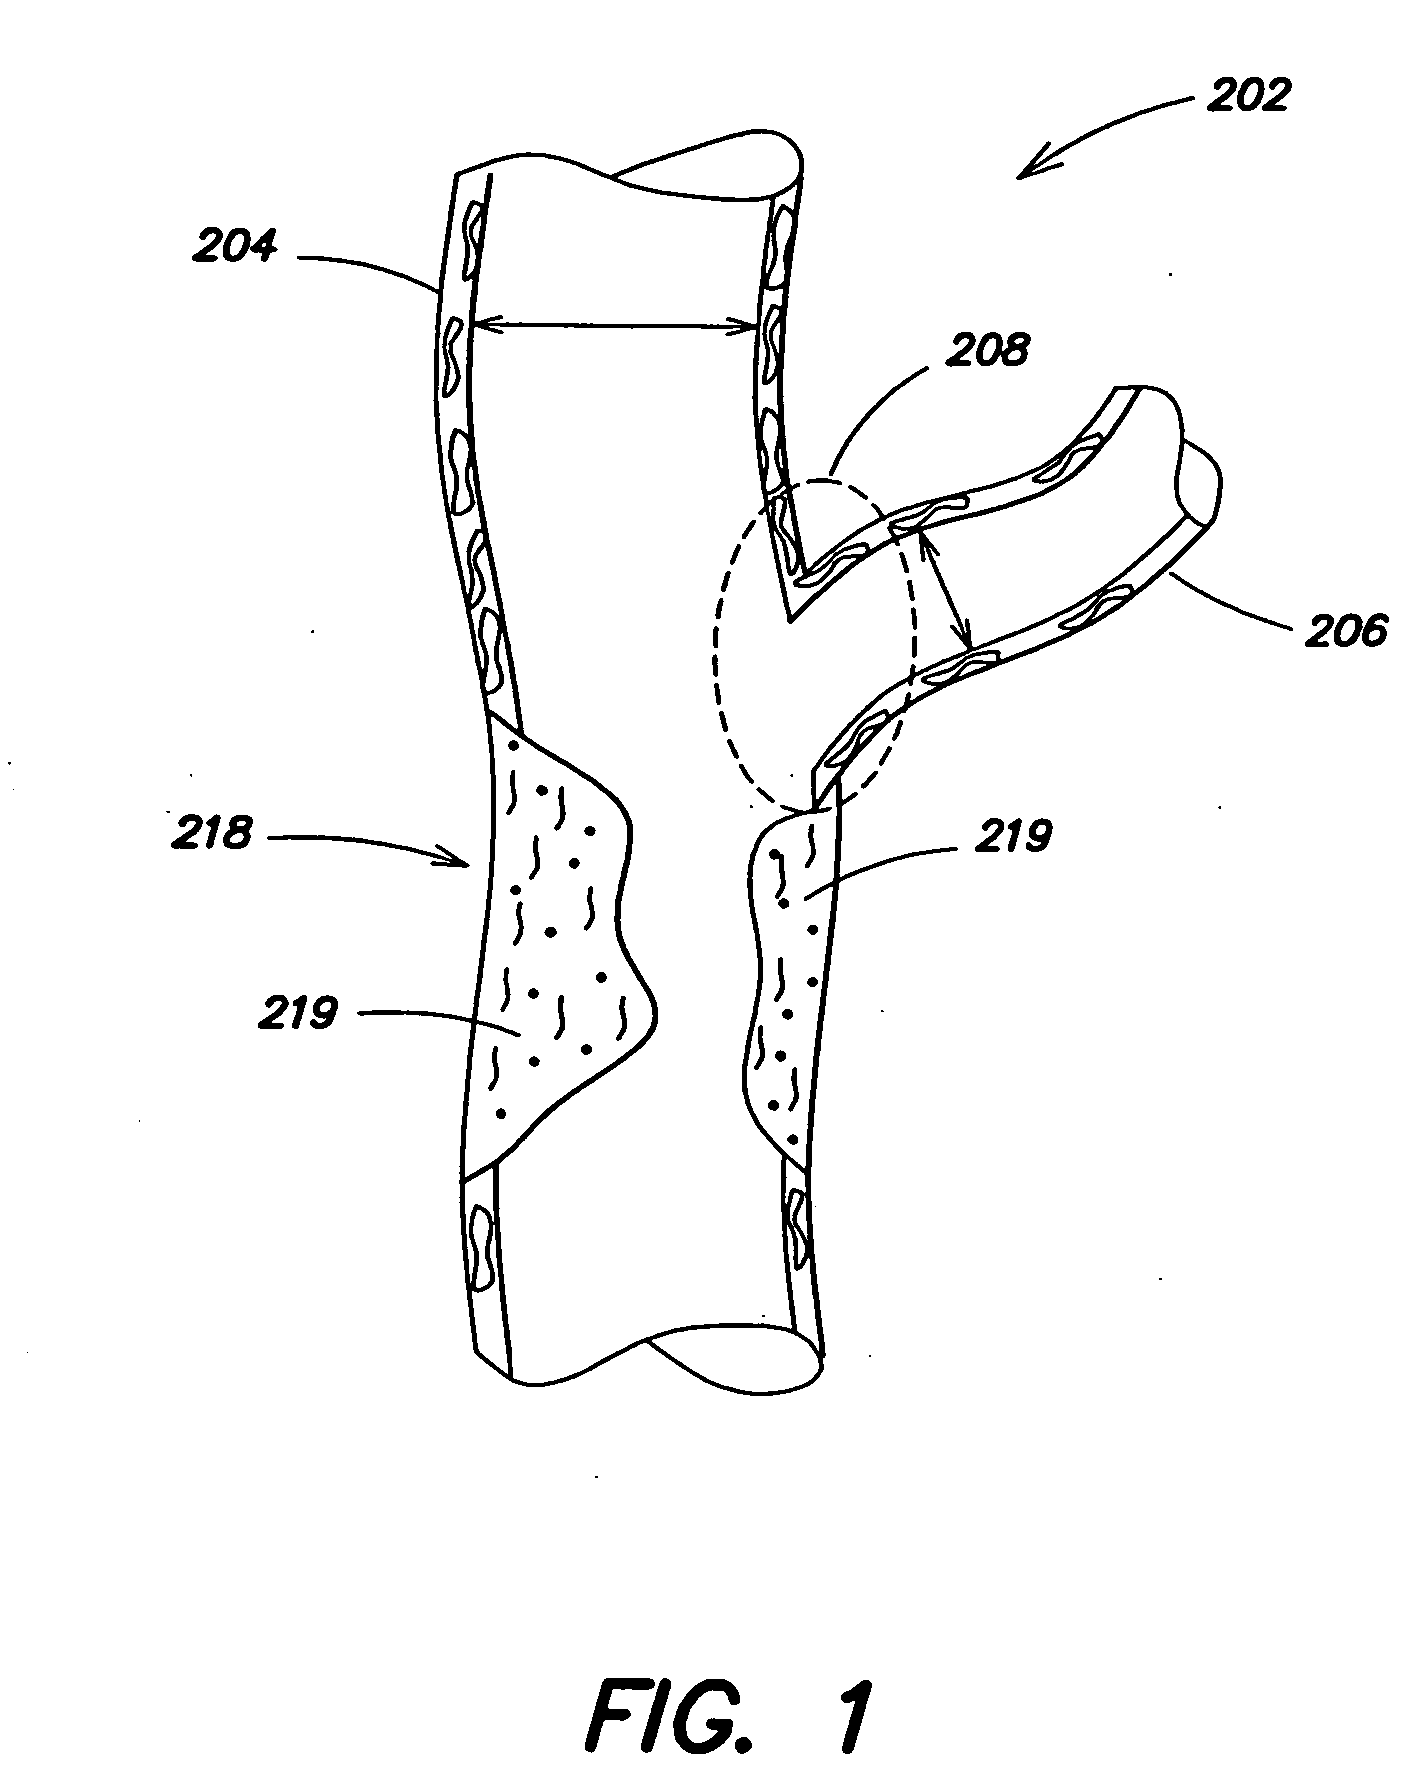 Segmented ostial protection device